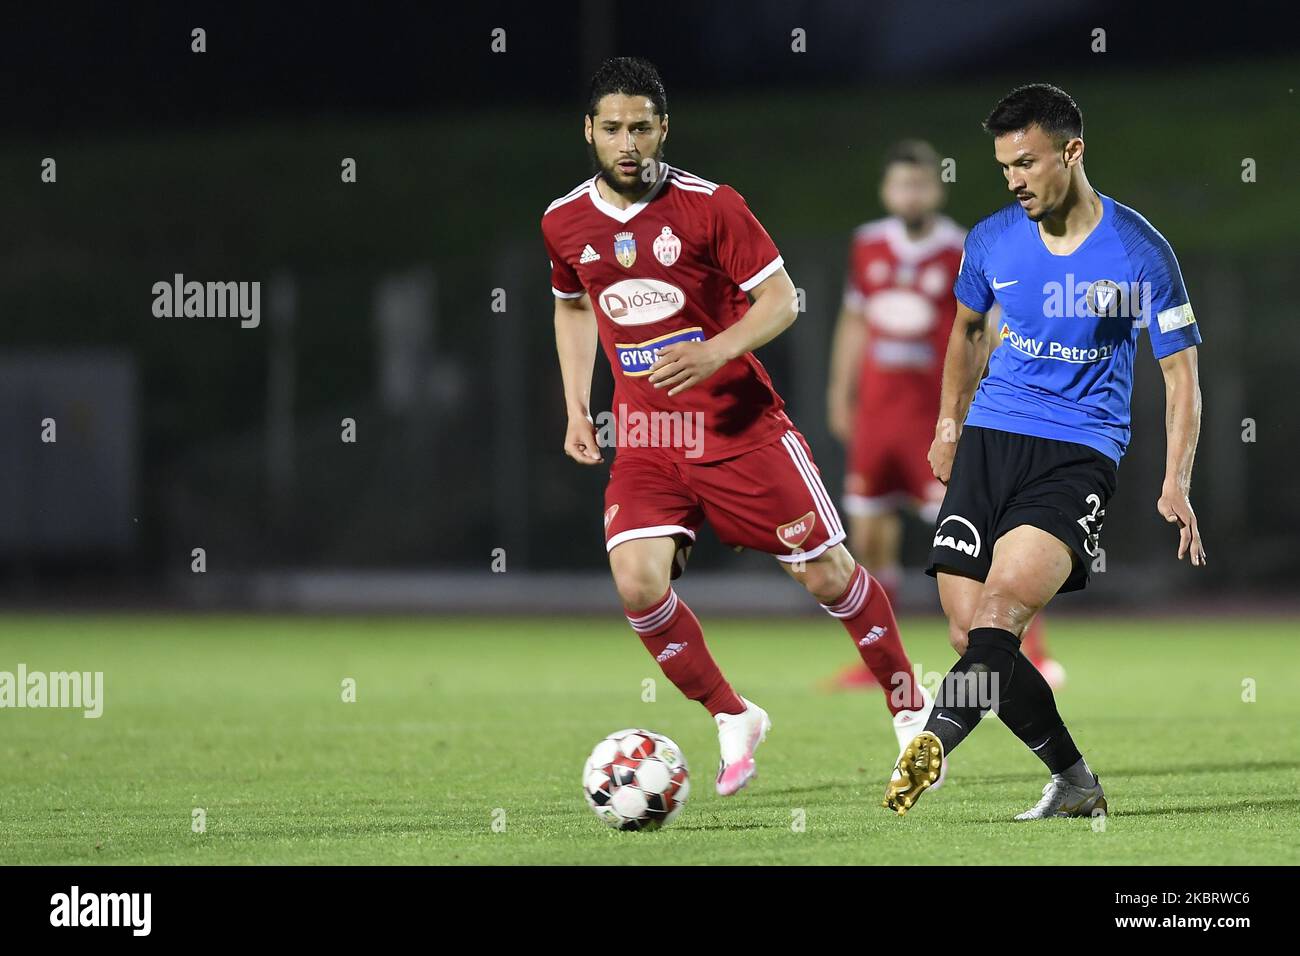 Roland Niczuly of Sepsi OSK in action during semifinal of the